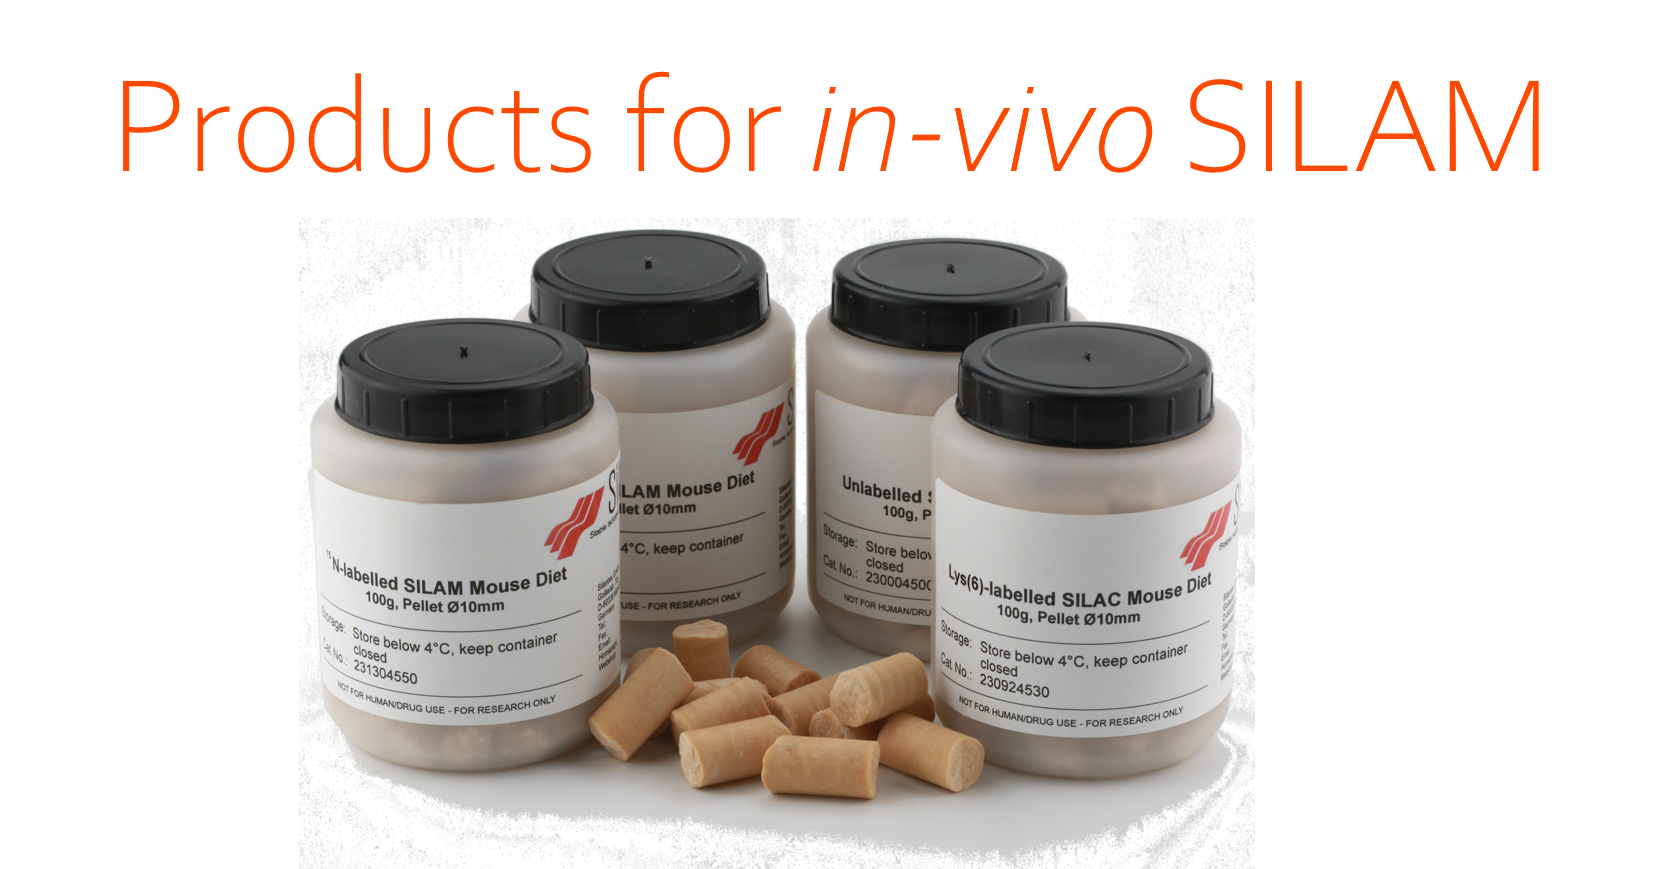 Products_for_in-vivo_SILAM_final